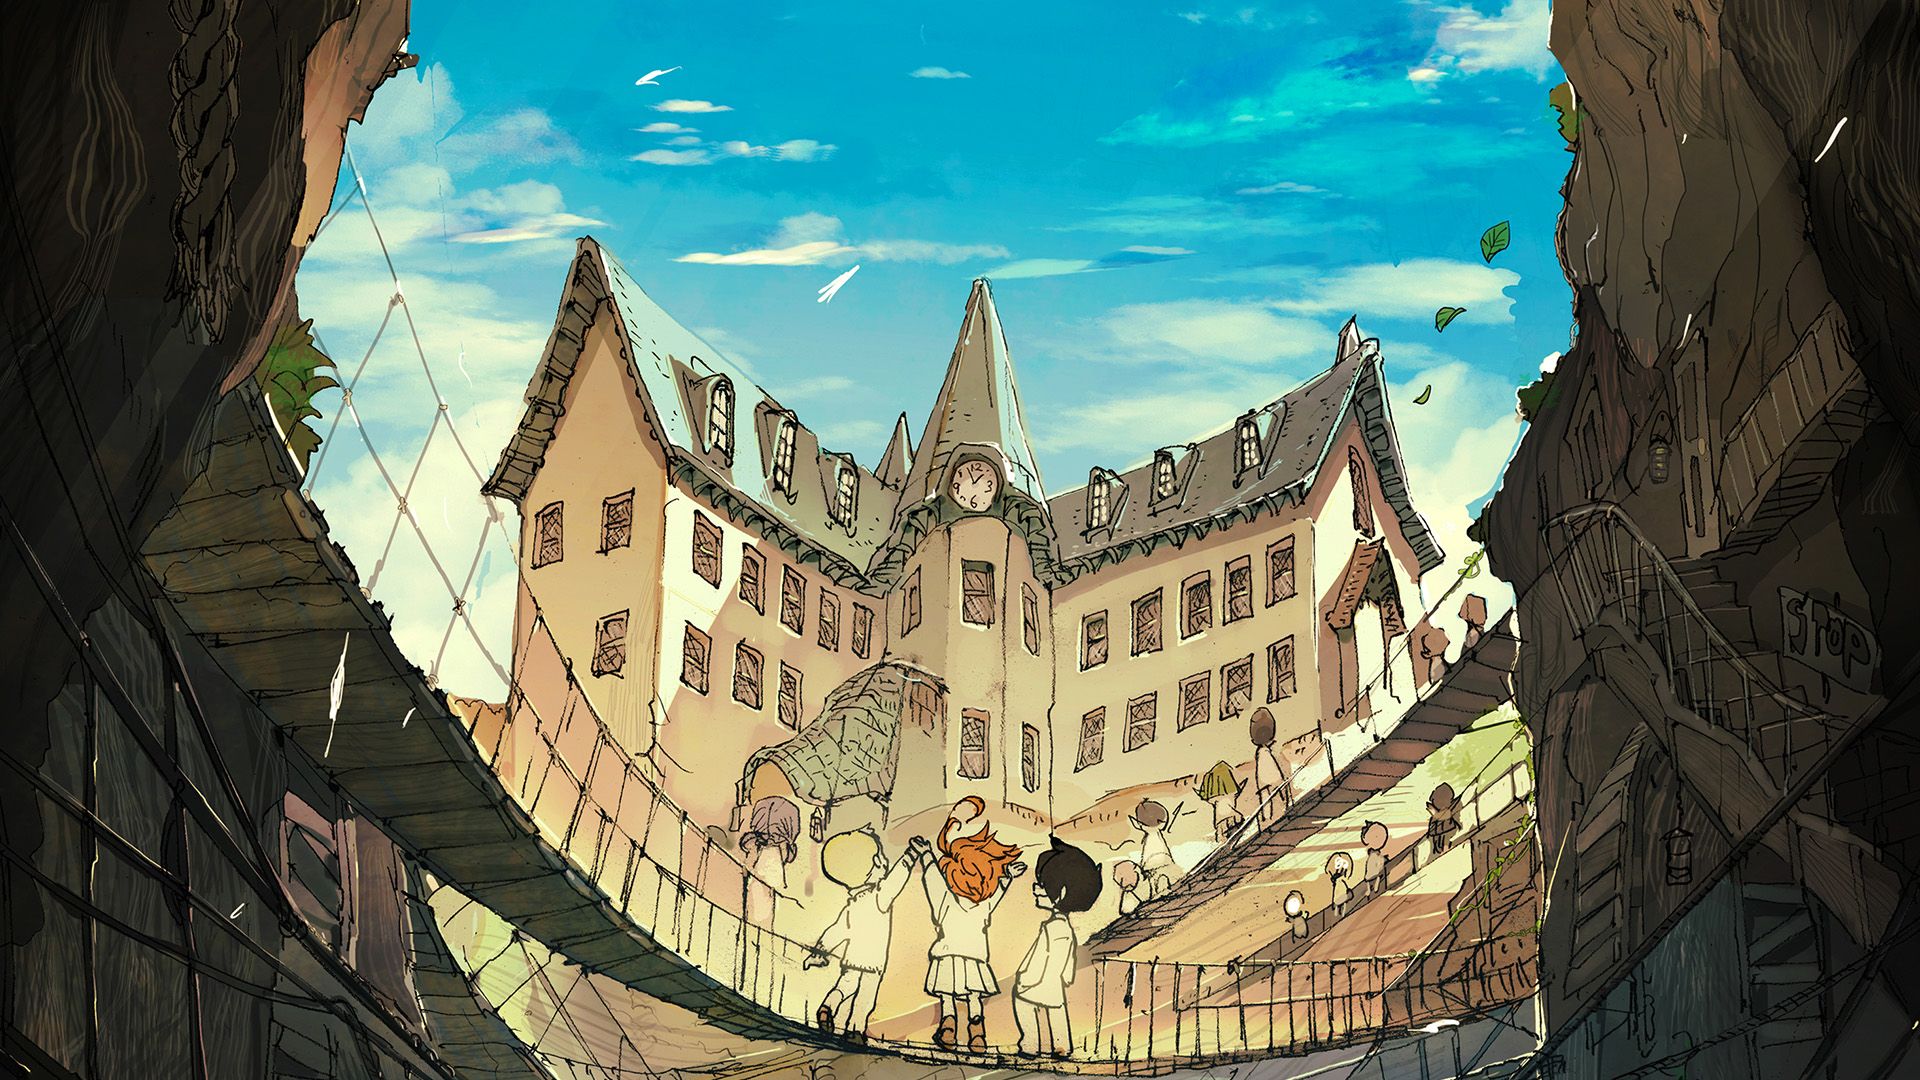 The Promised Neverland background